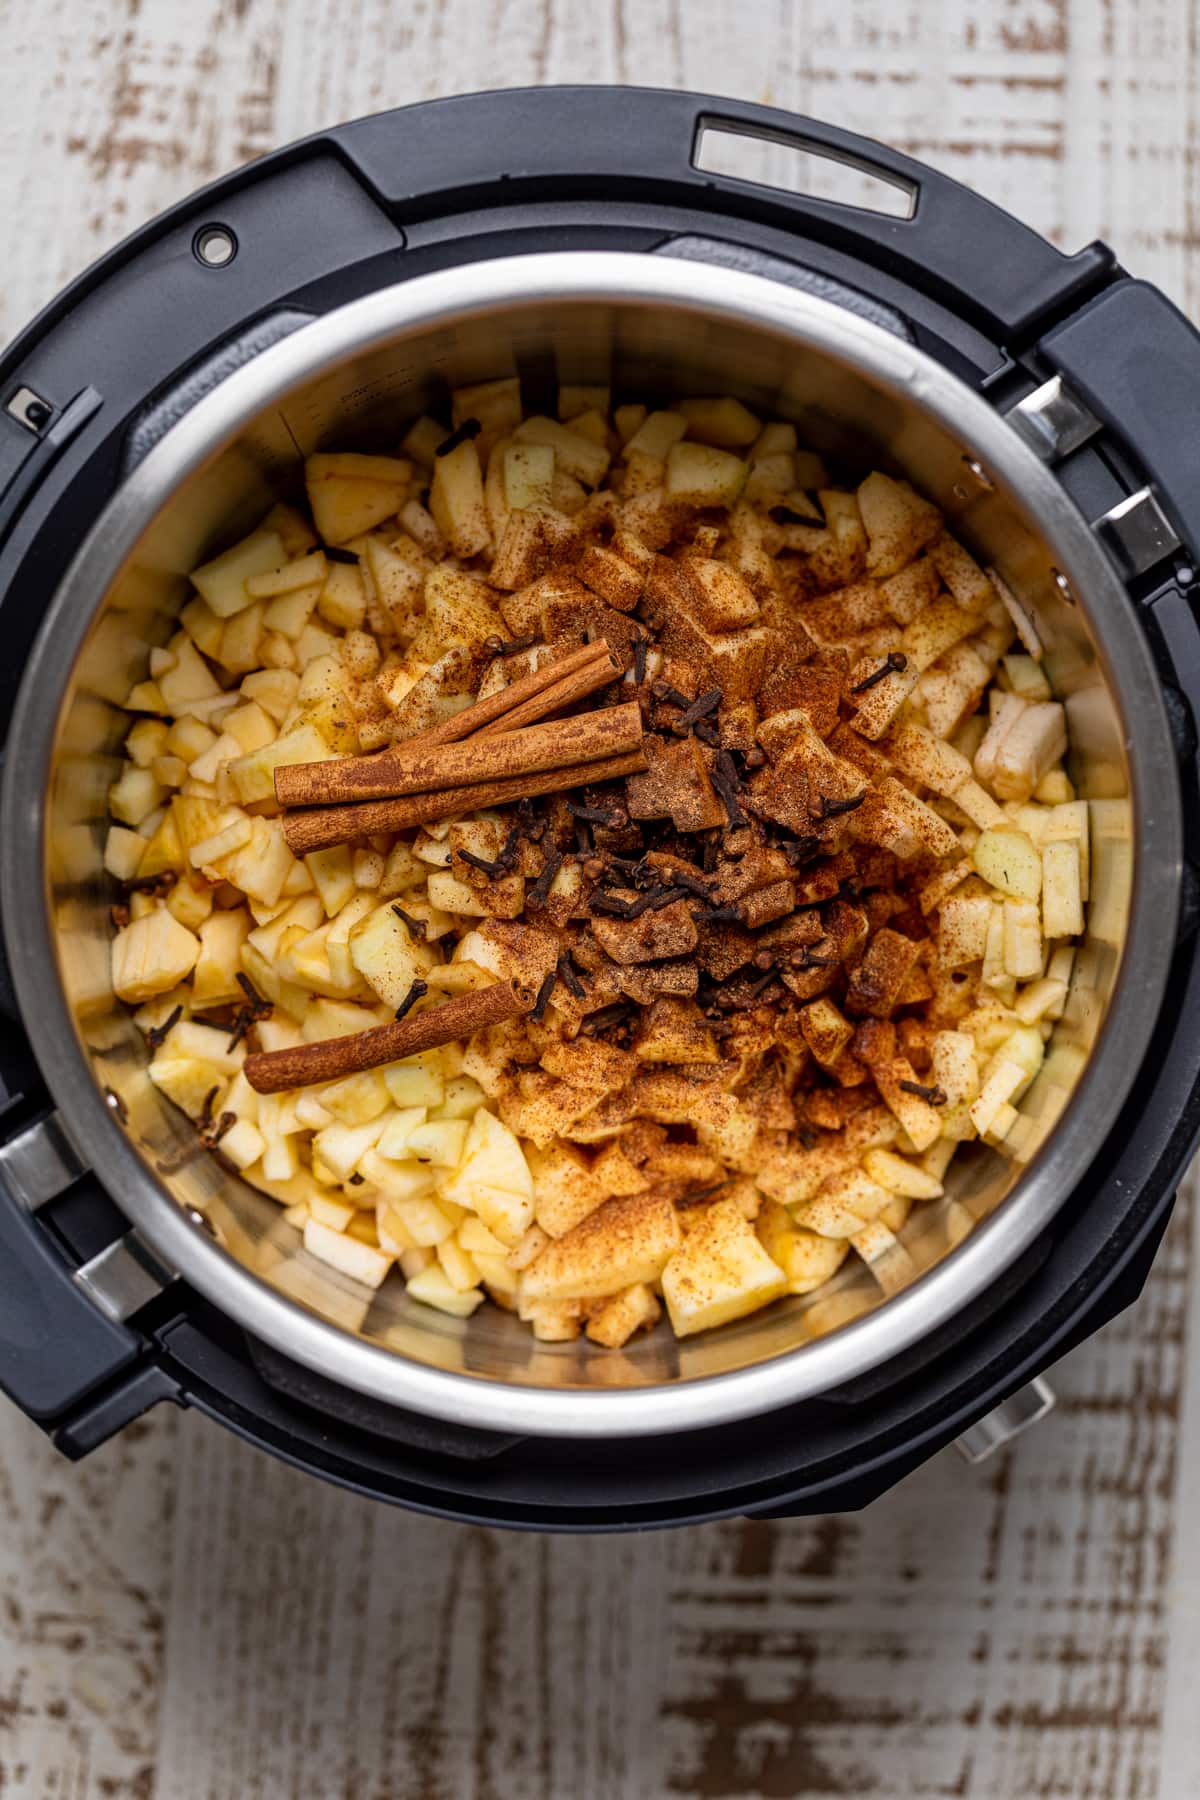 Slower cooker full of apple pieces, cinnamon sticks, and spices.